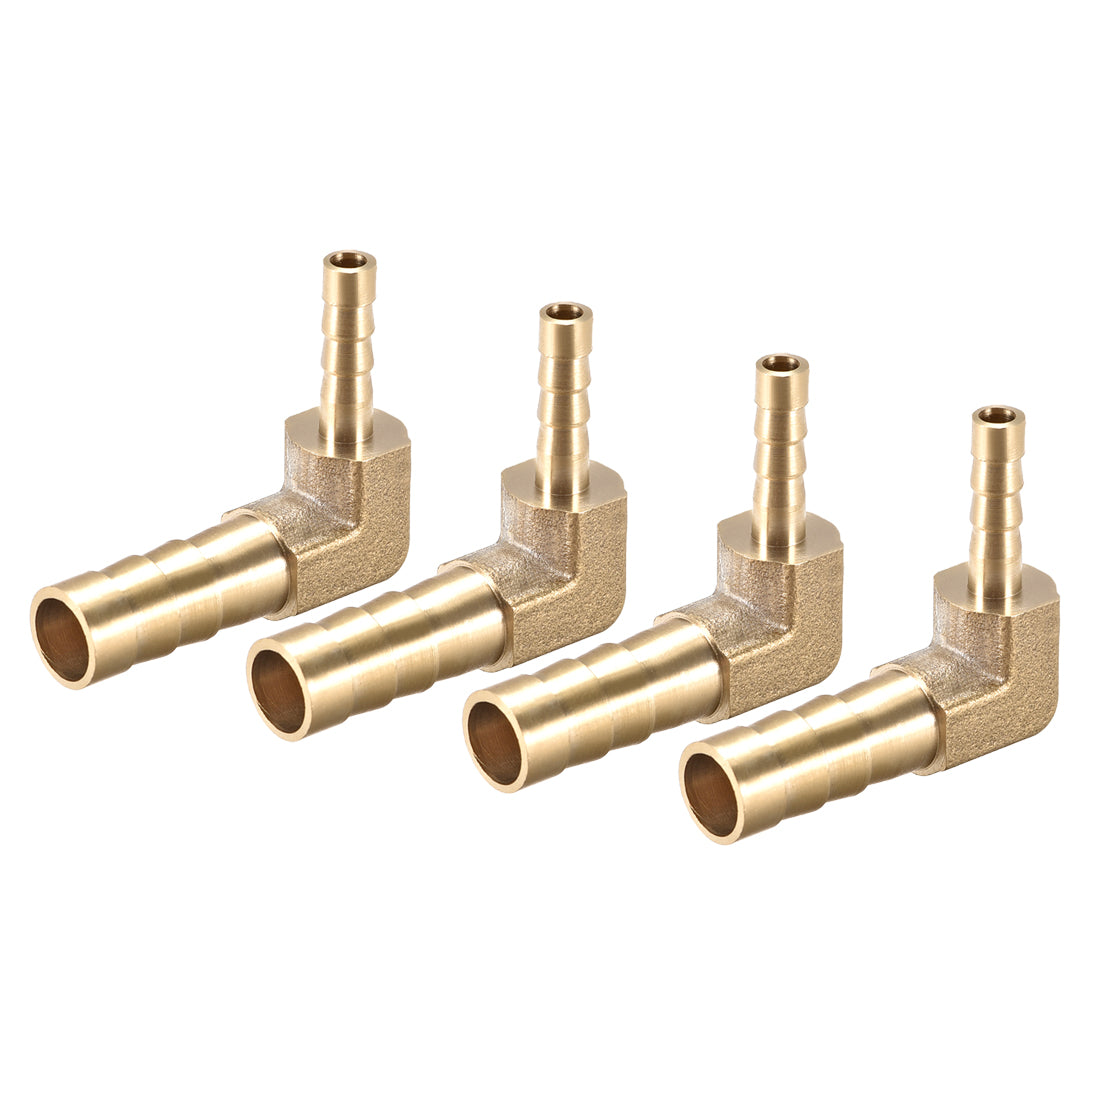 Uxcell Uxcell 10mm to 4mm Barb Brass Hose Fitting 90 Degree Elbow Pipe Connector Coupler 4pcs